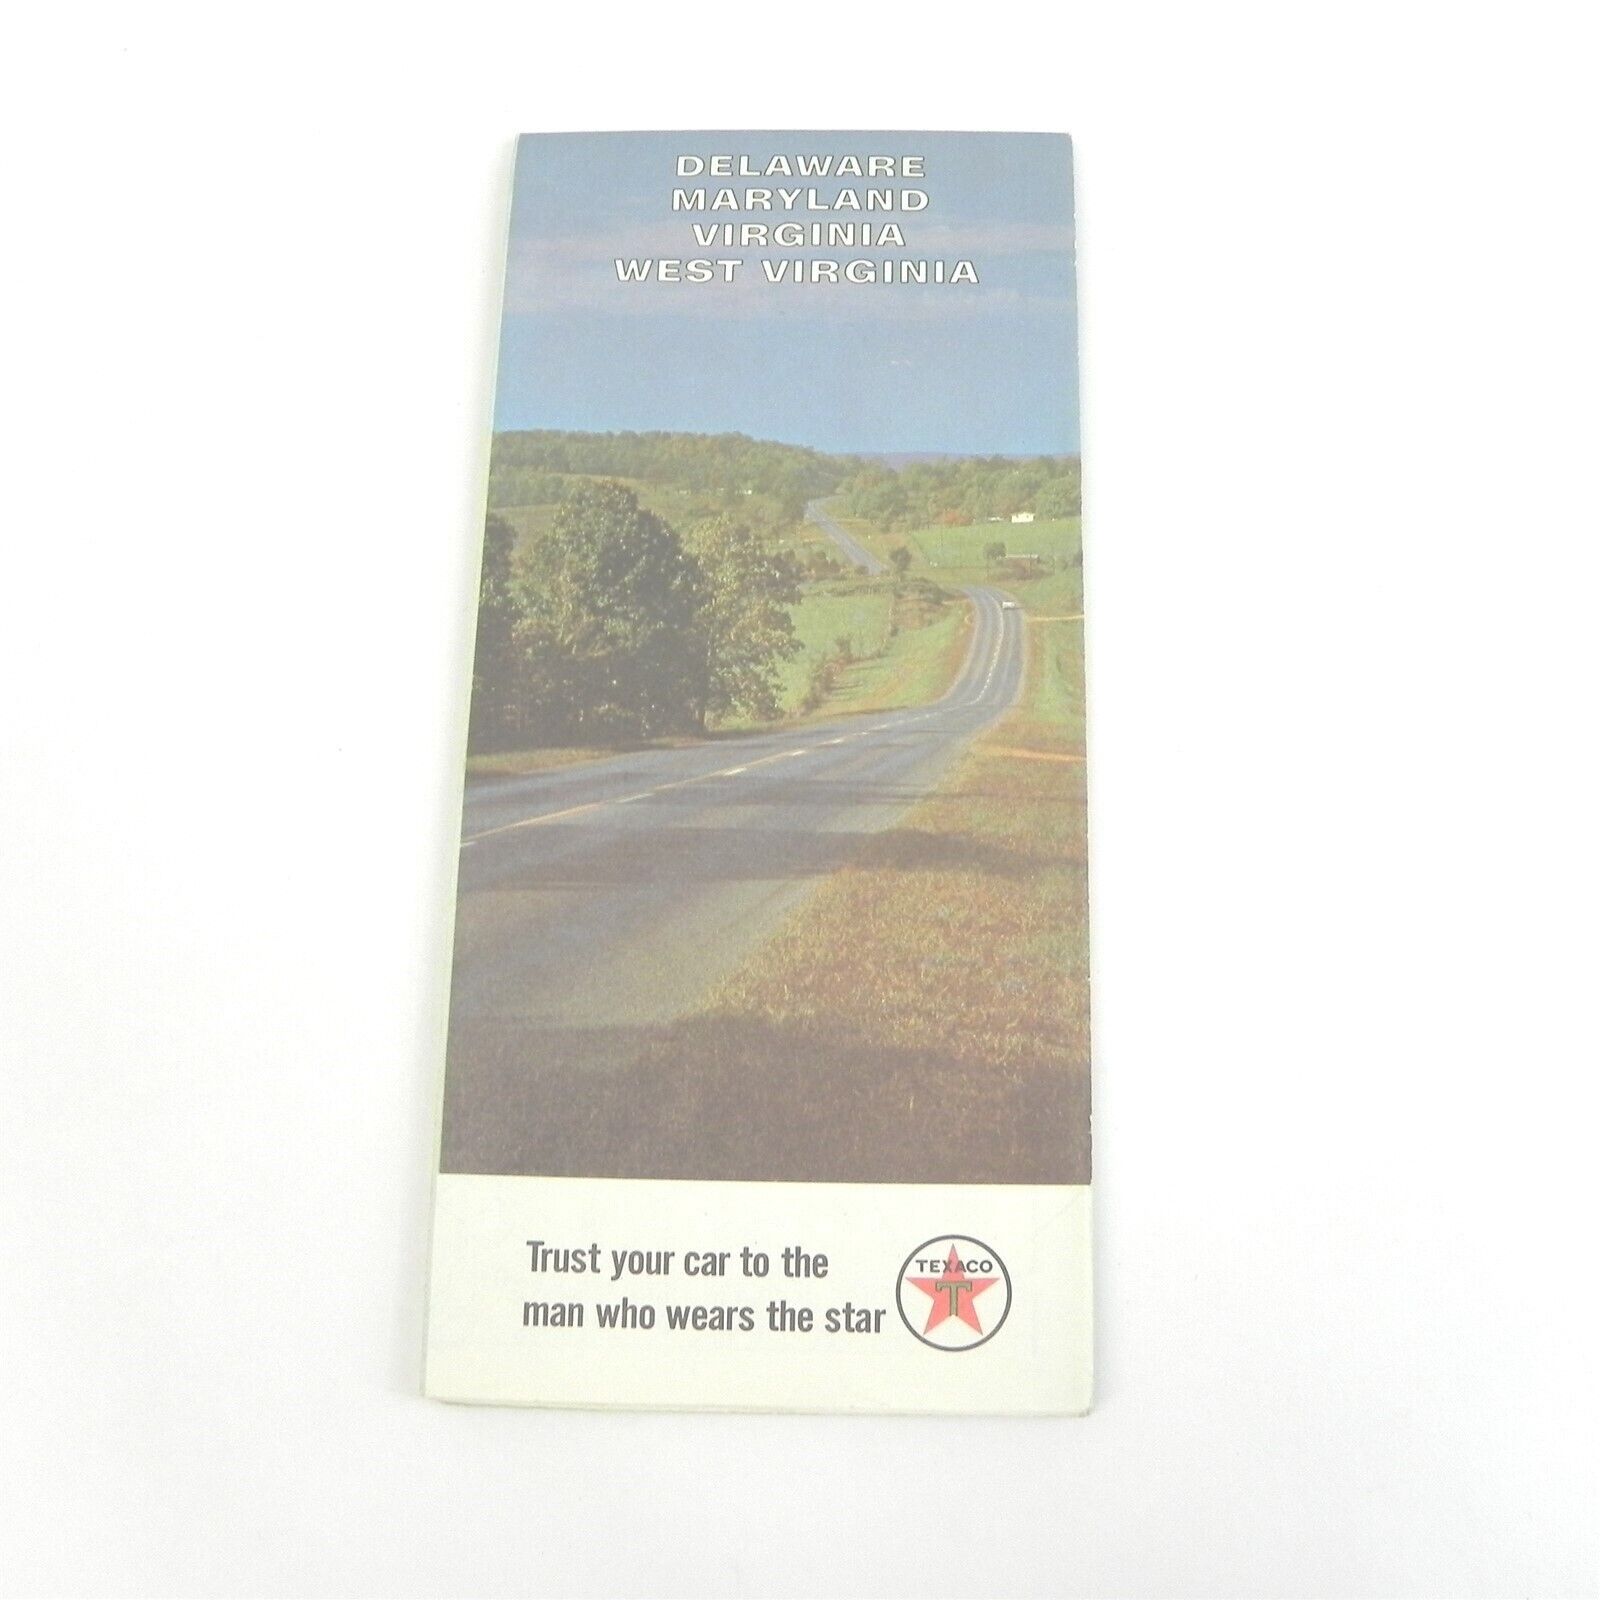 VINTAGE 1965 TEXACO GAS OIL COMPANY TOURING ROAD MAP OF DELAWARE MARYLAND